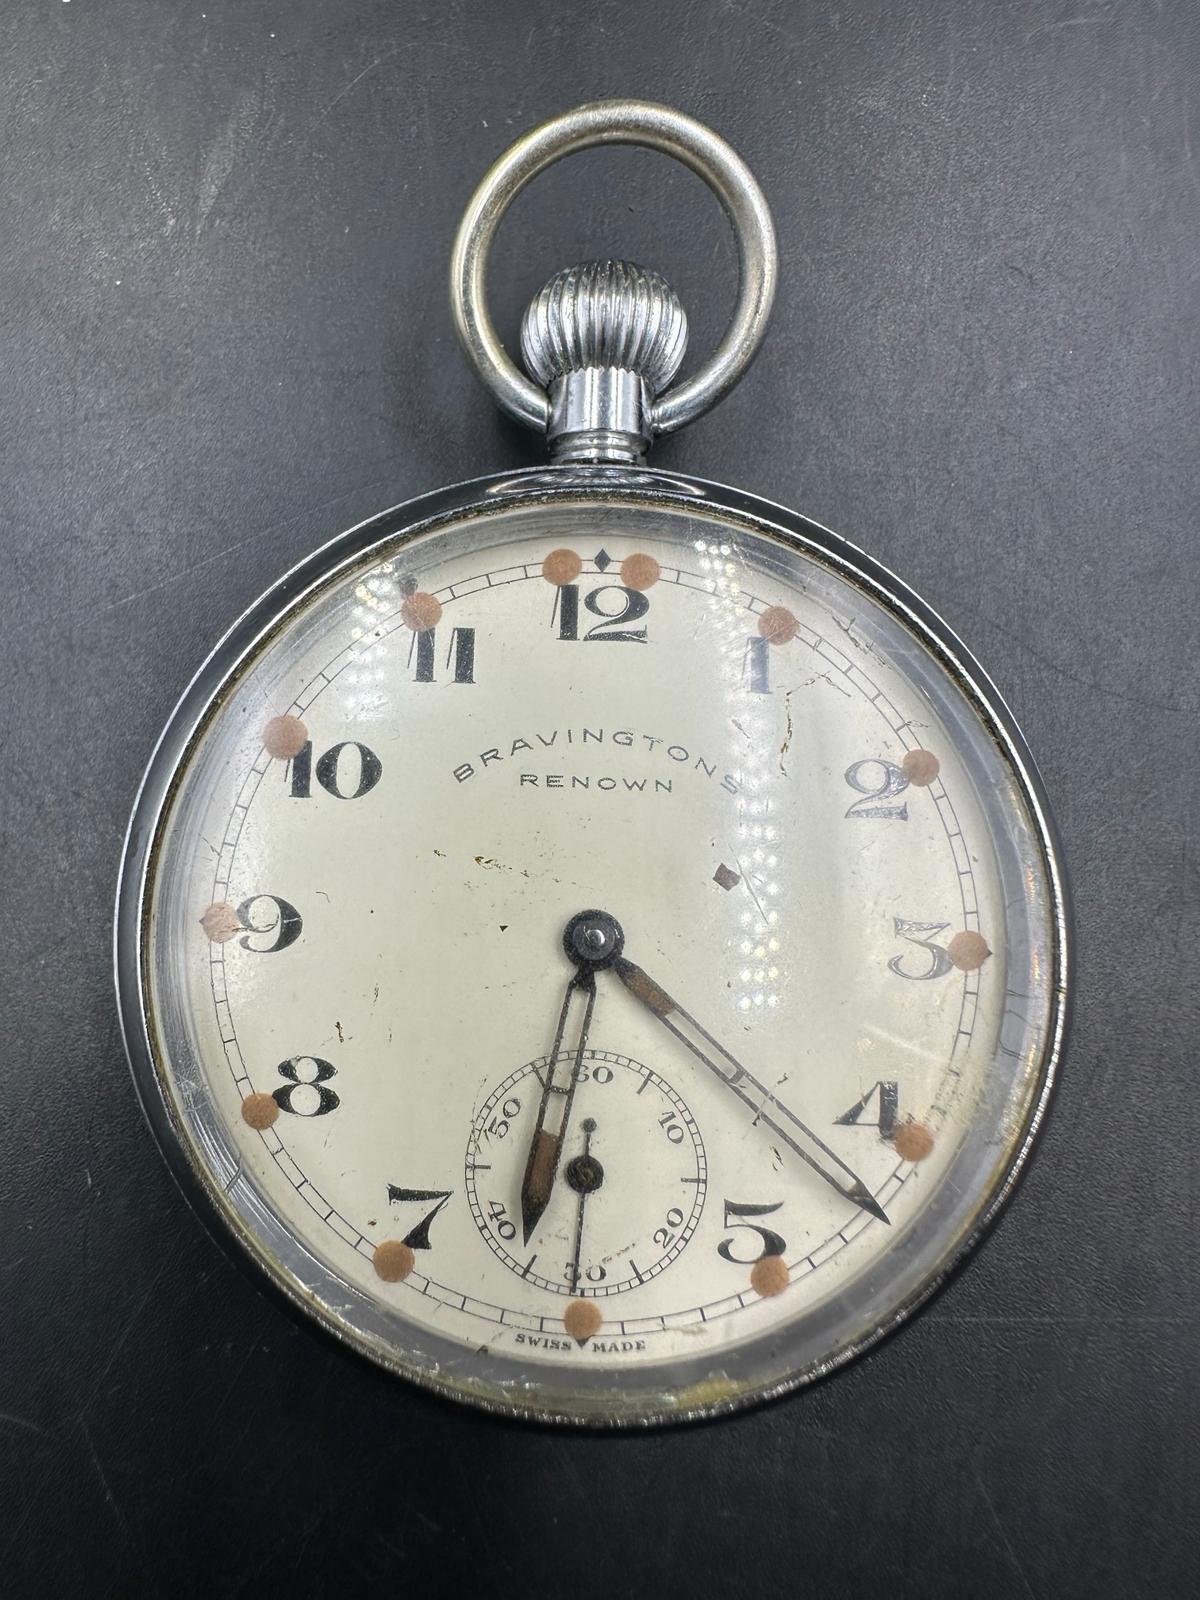 A vintage Bravingtons Renown pocket watch in a nickel chromium plated cess - Image 4 of 6